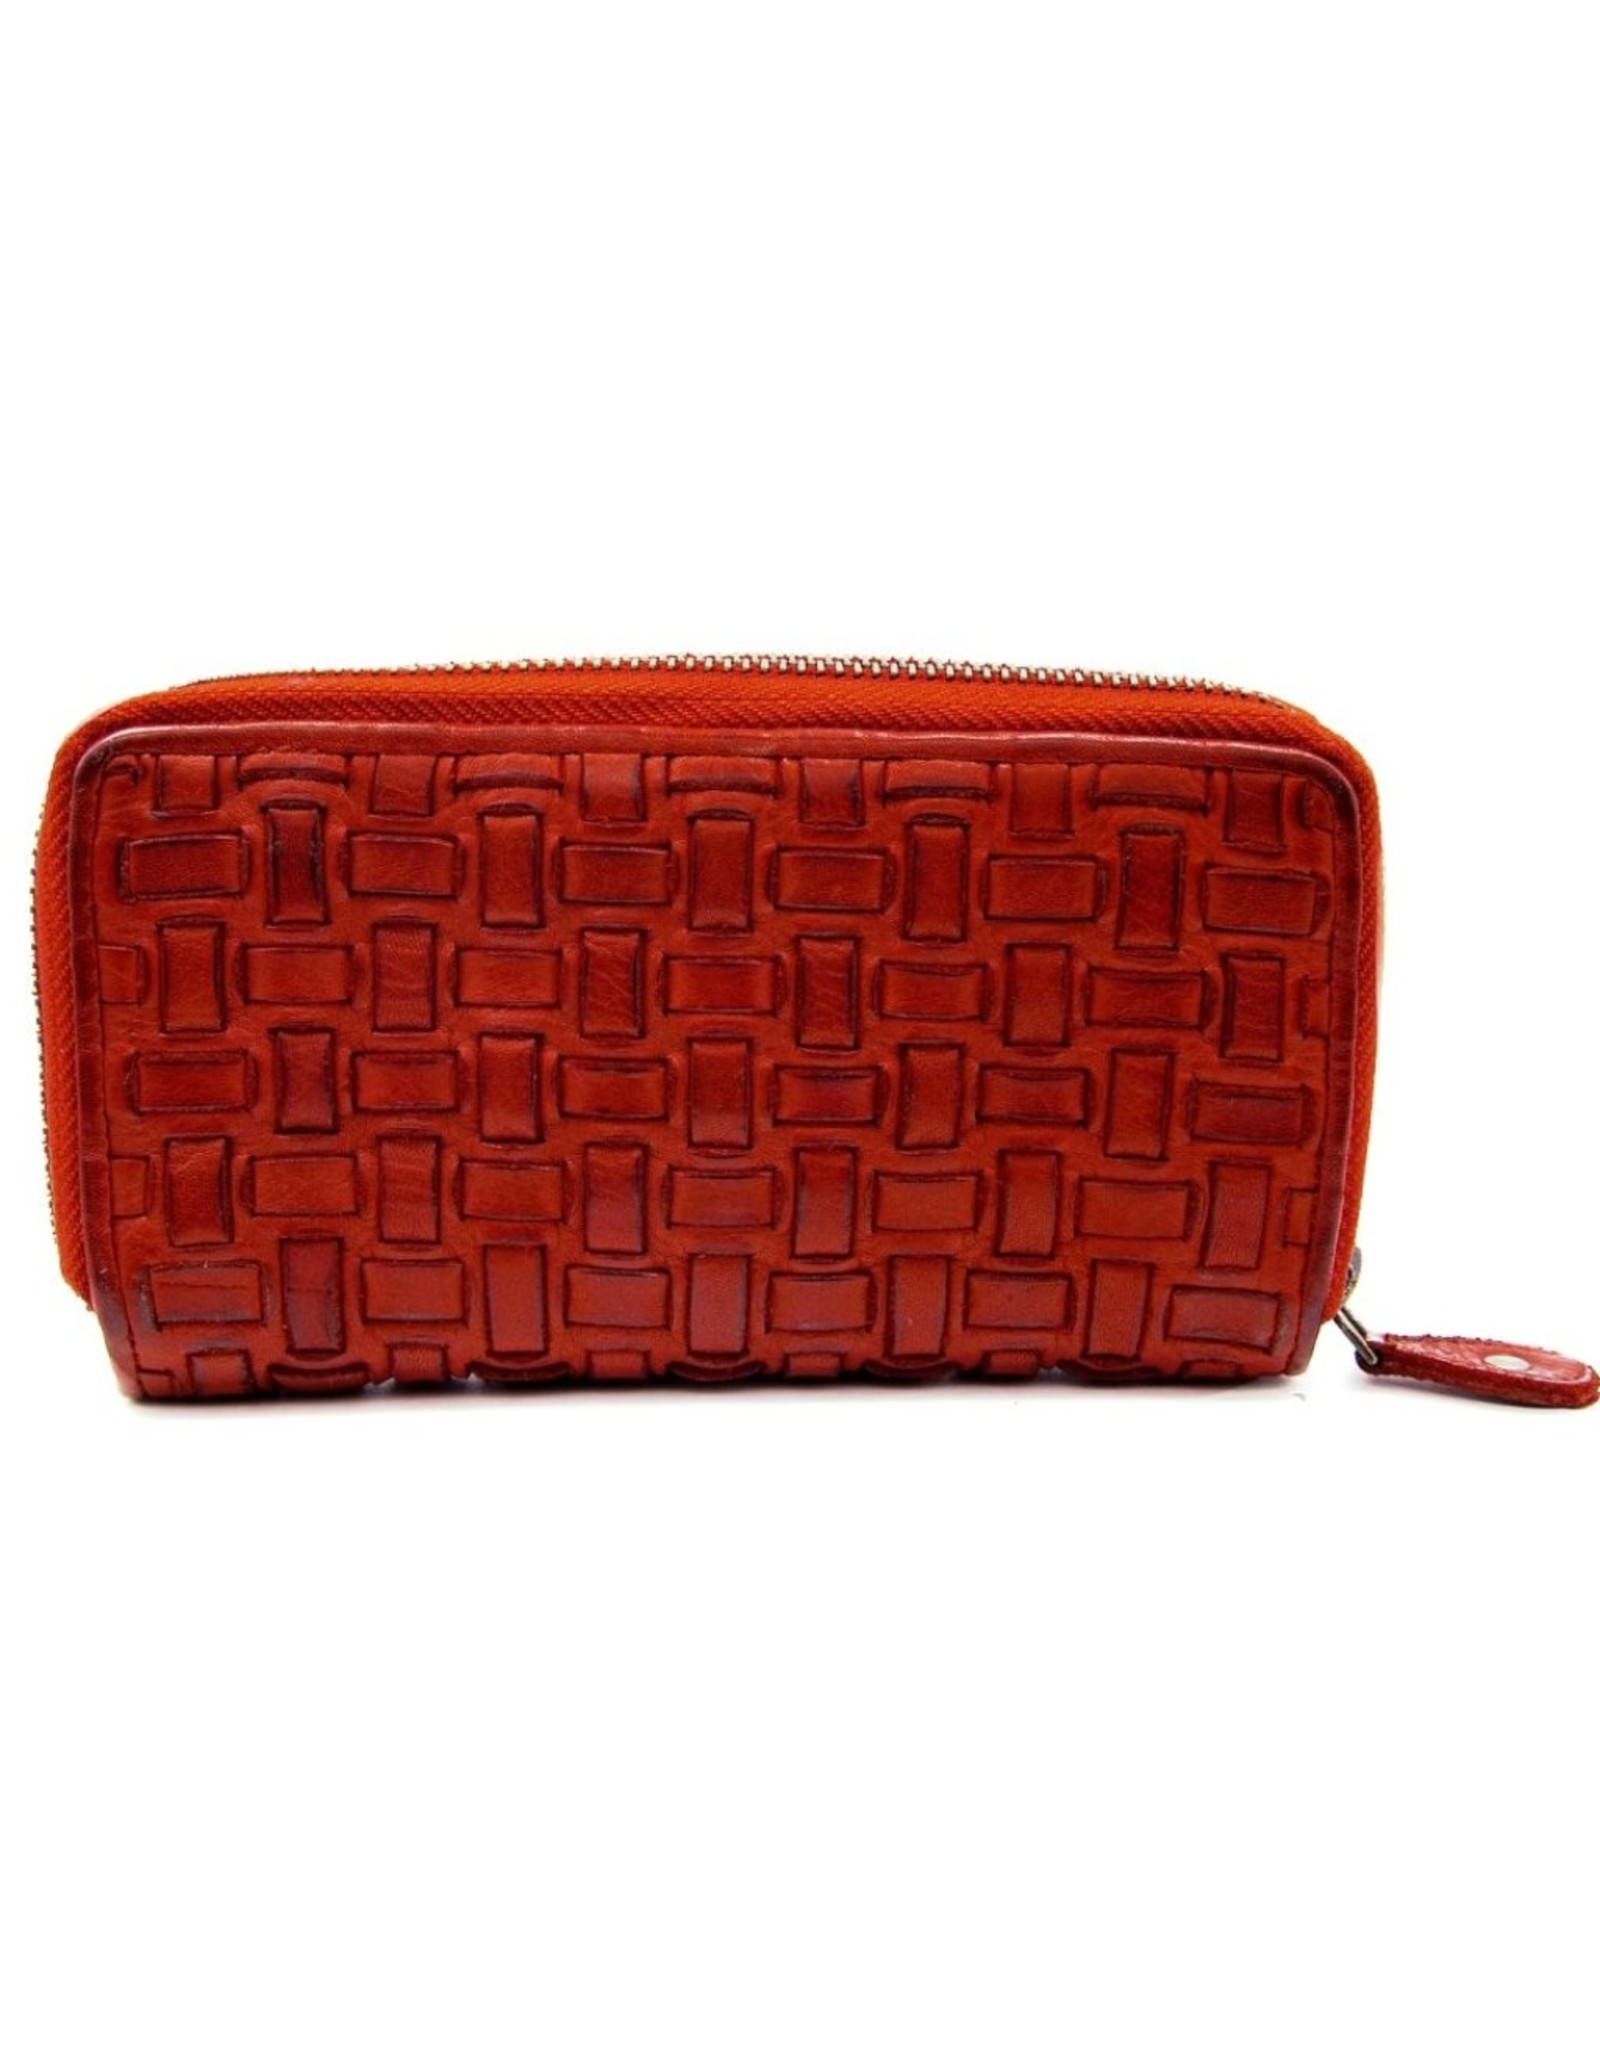 Bellicci Leather Wallets - Leather wallet braided washed leather Bellicci (red)